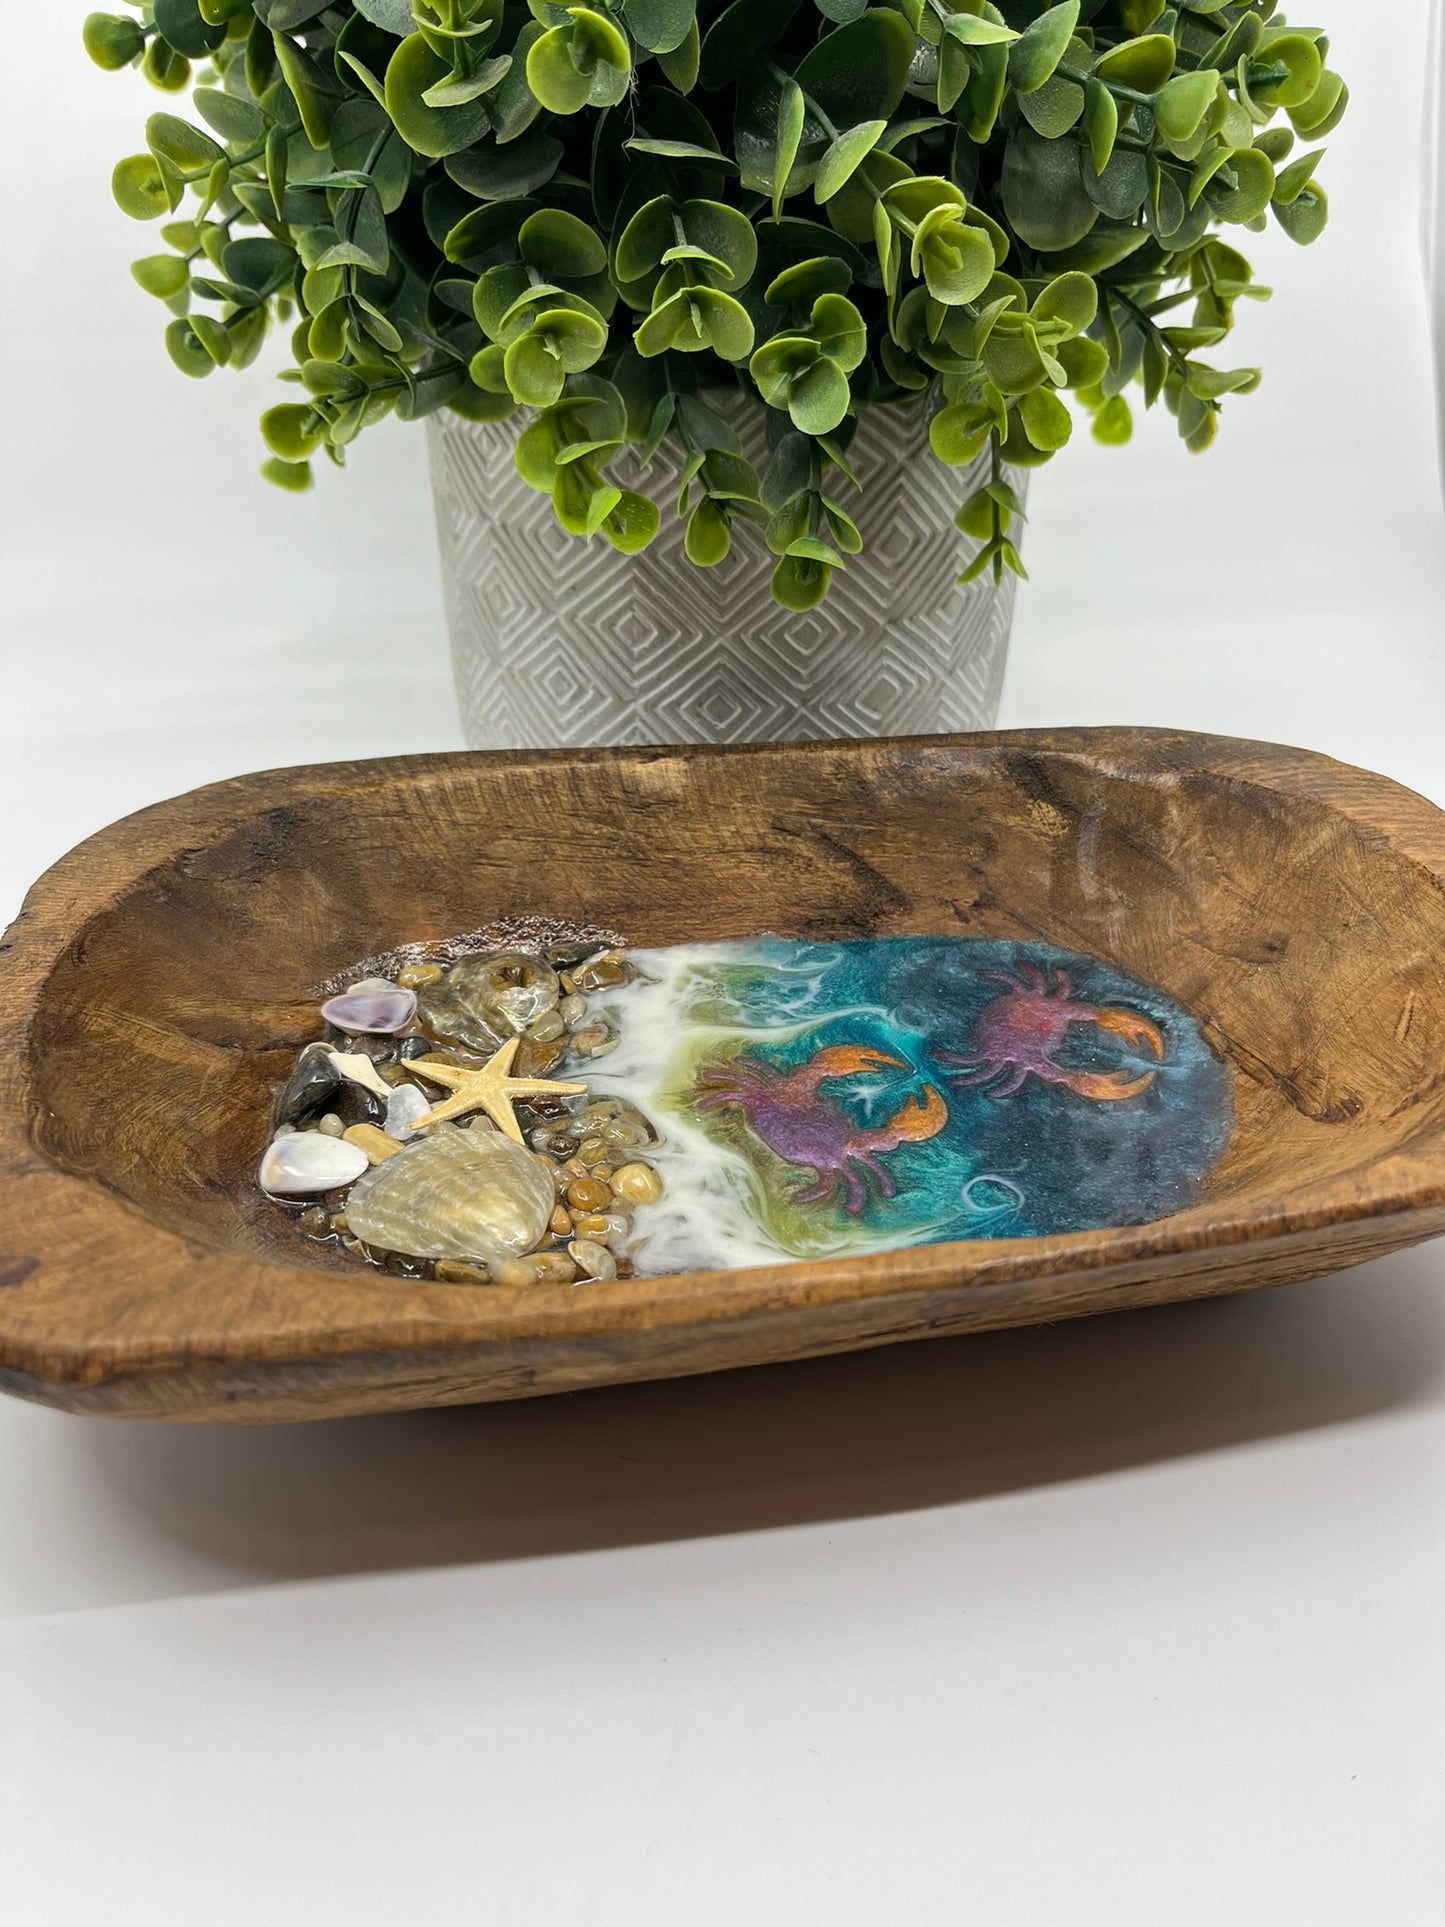 Wooden Primitive Dough Bowl with Ocean Resin Orange and Purple Crabs and Outer Banks Shells